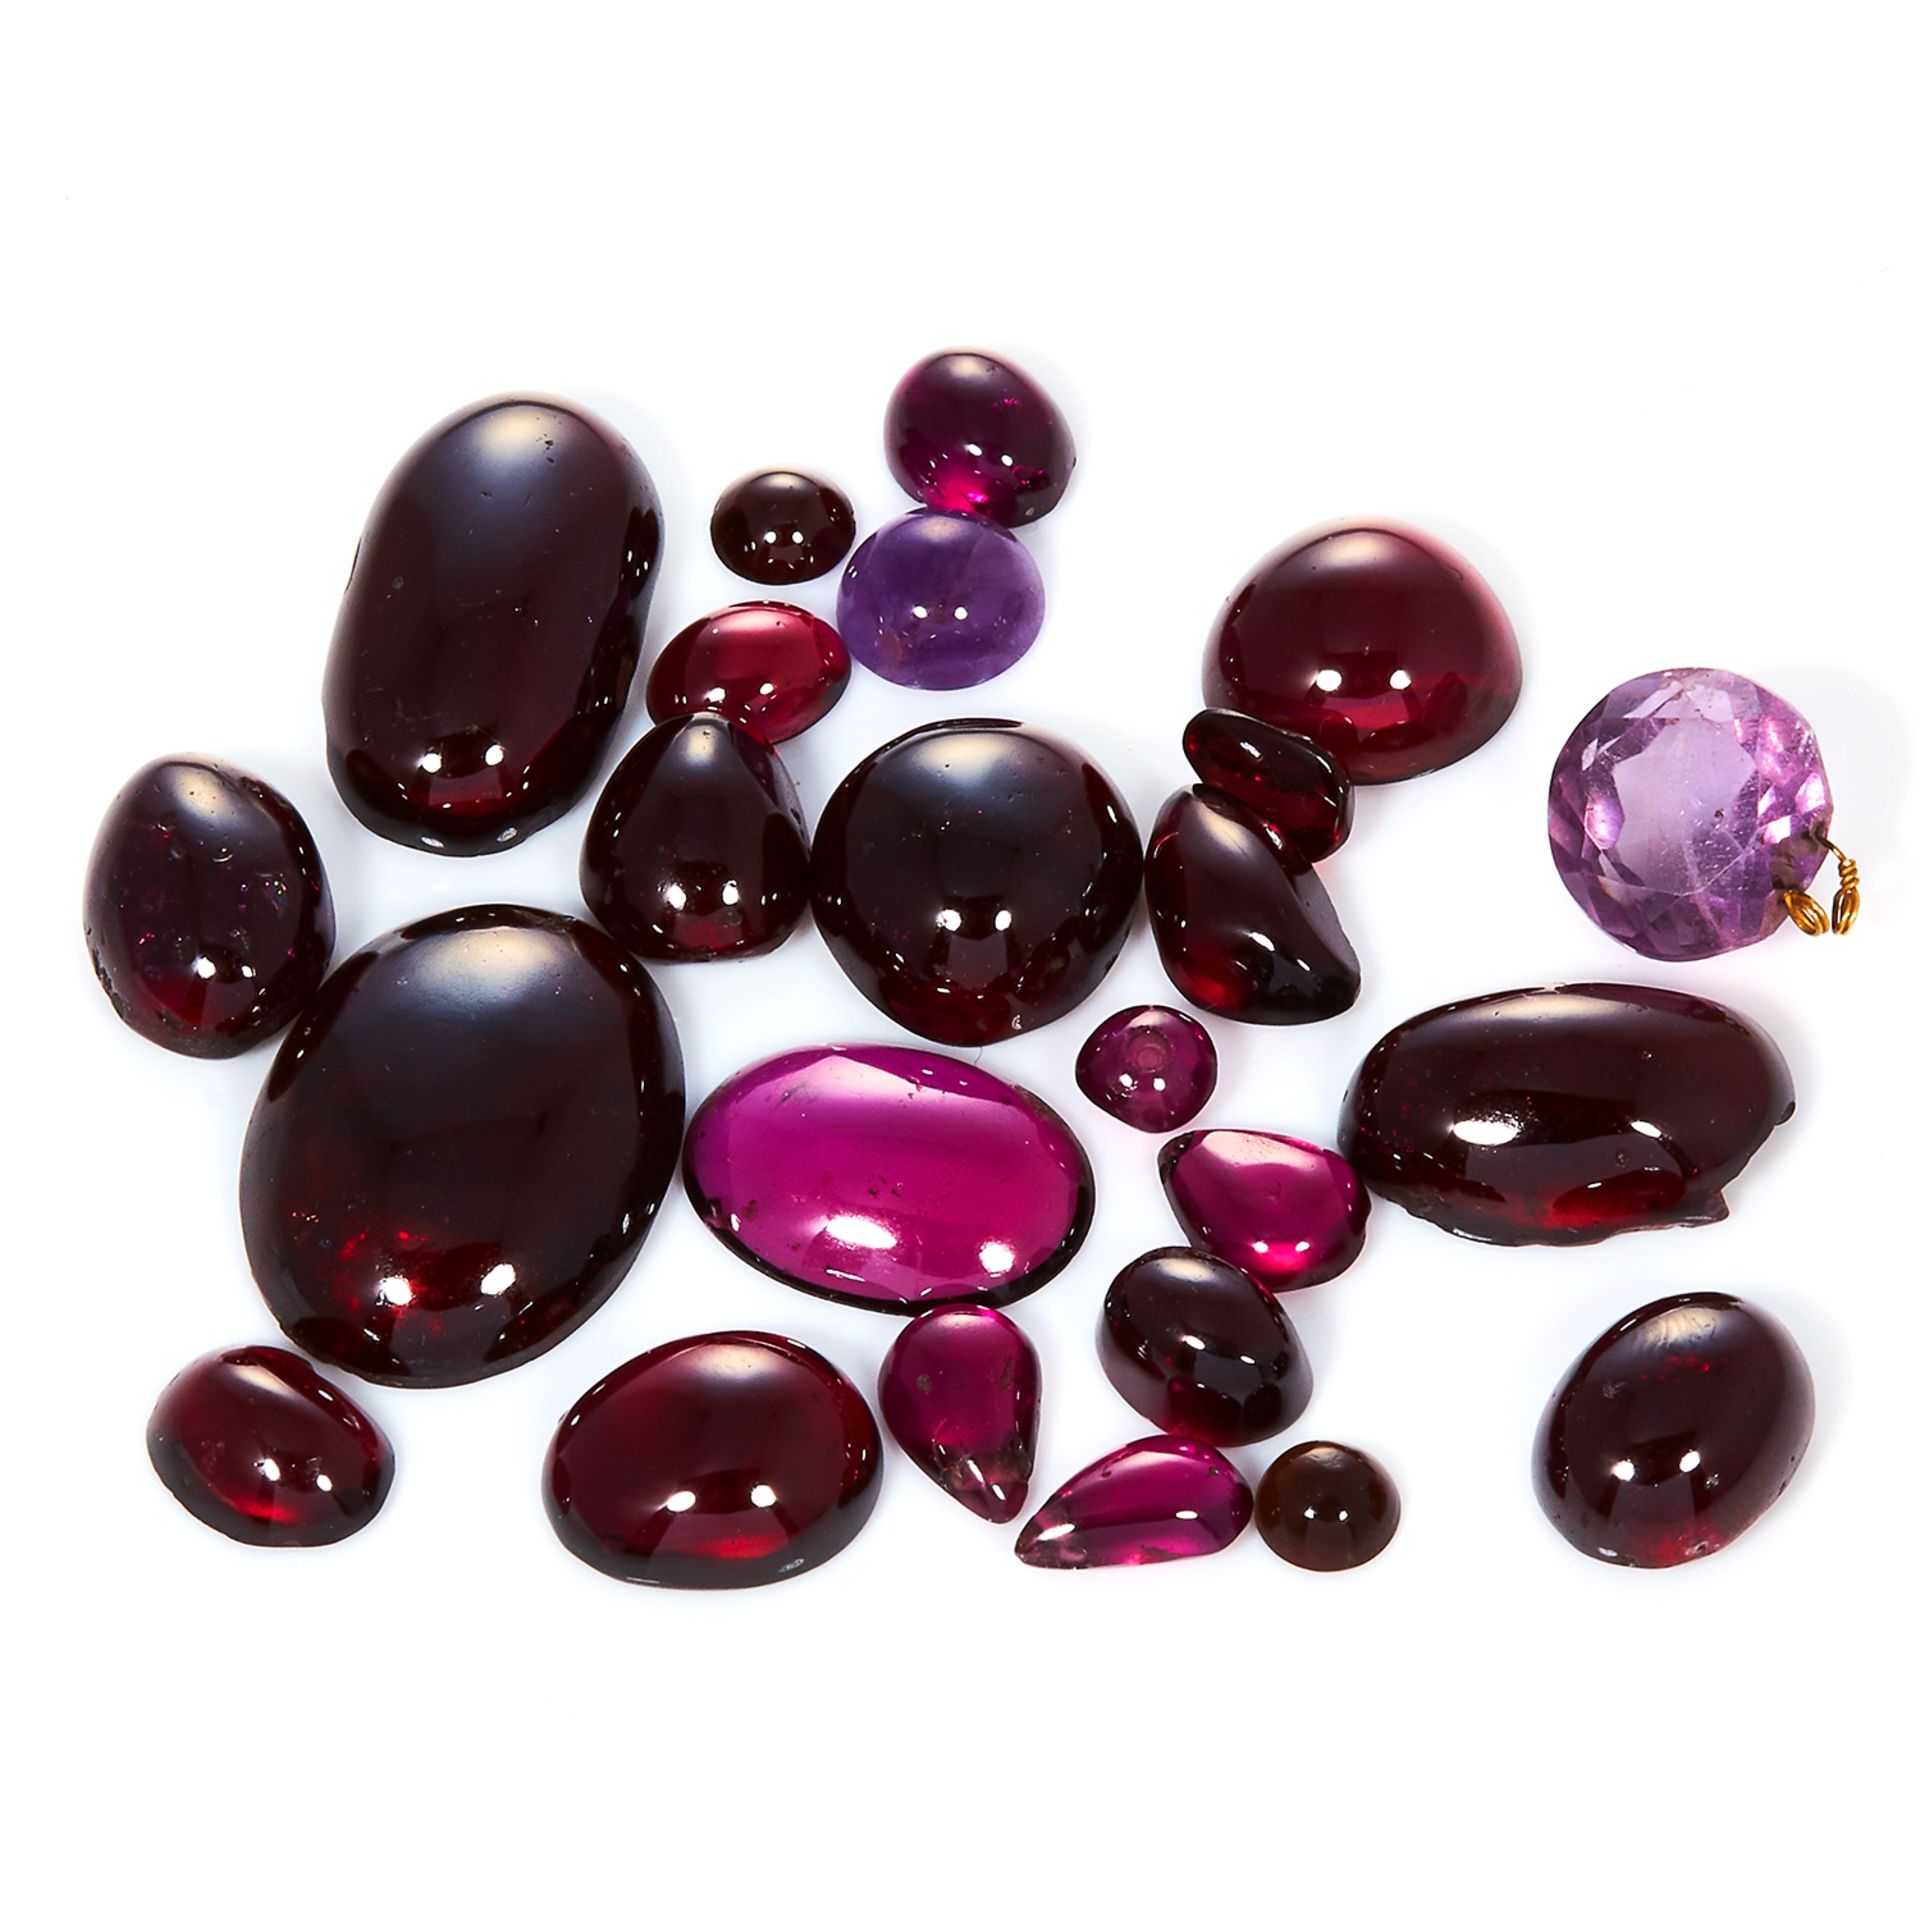 A 132.0 CARAT PARCEL OF AMETHYST AND GARNET including variously sized cabochons and faceted gems.